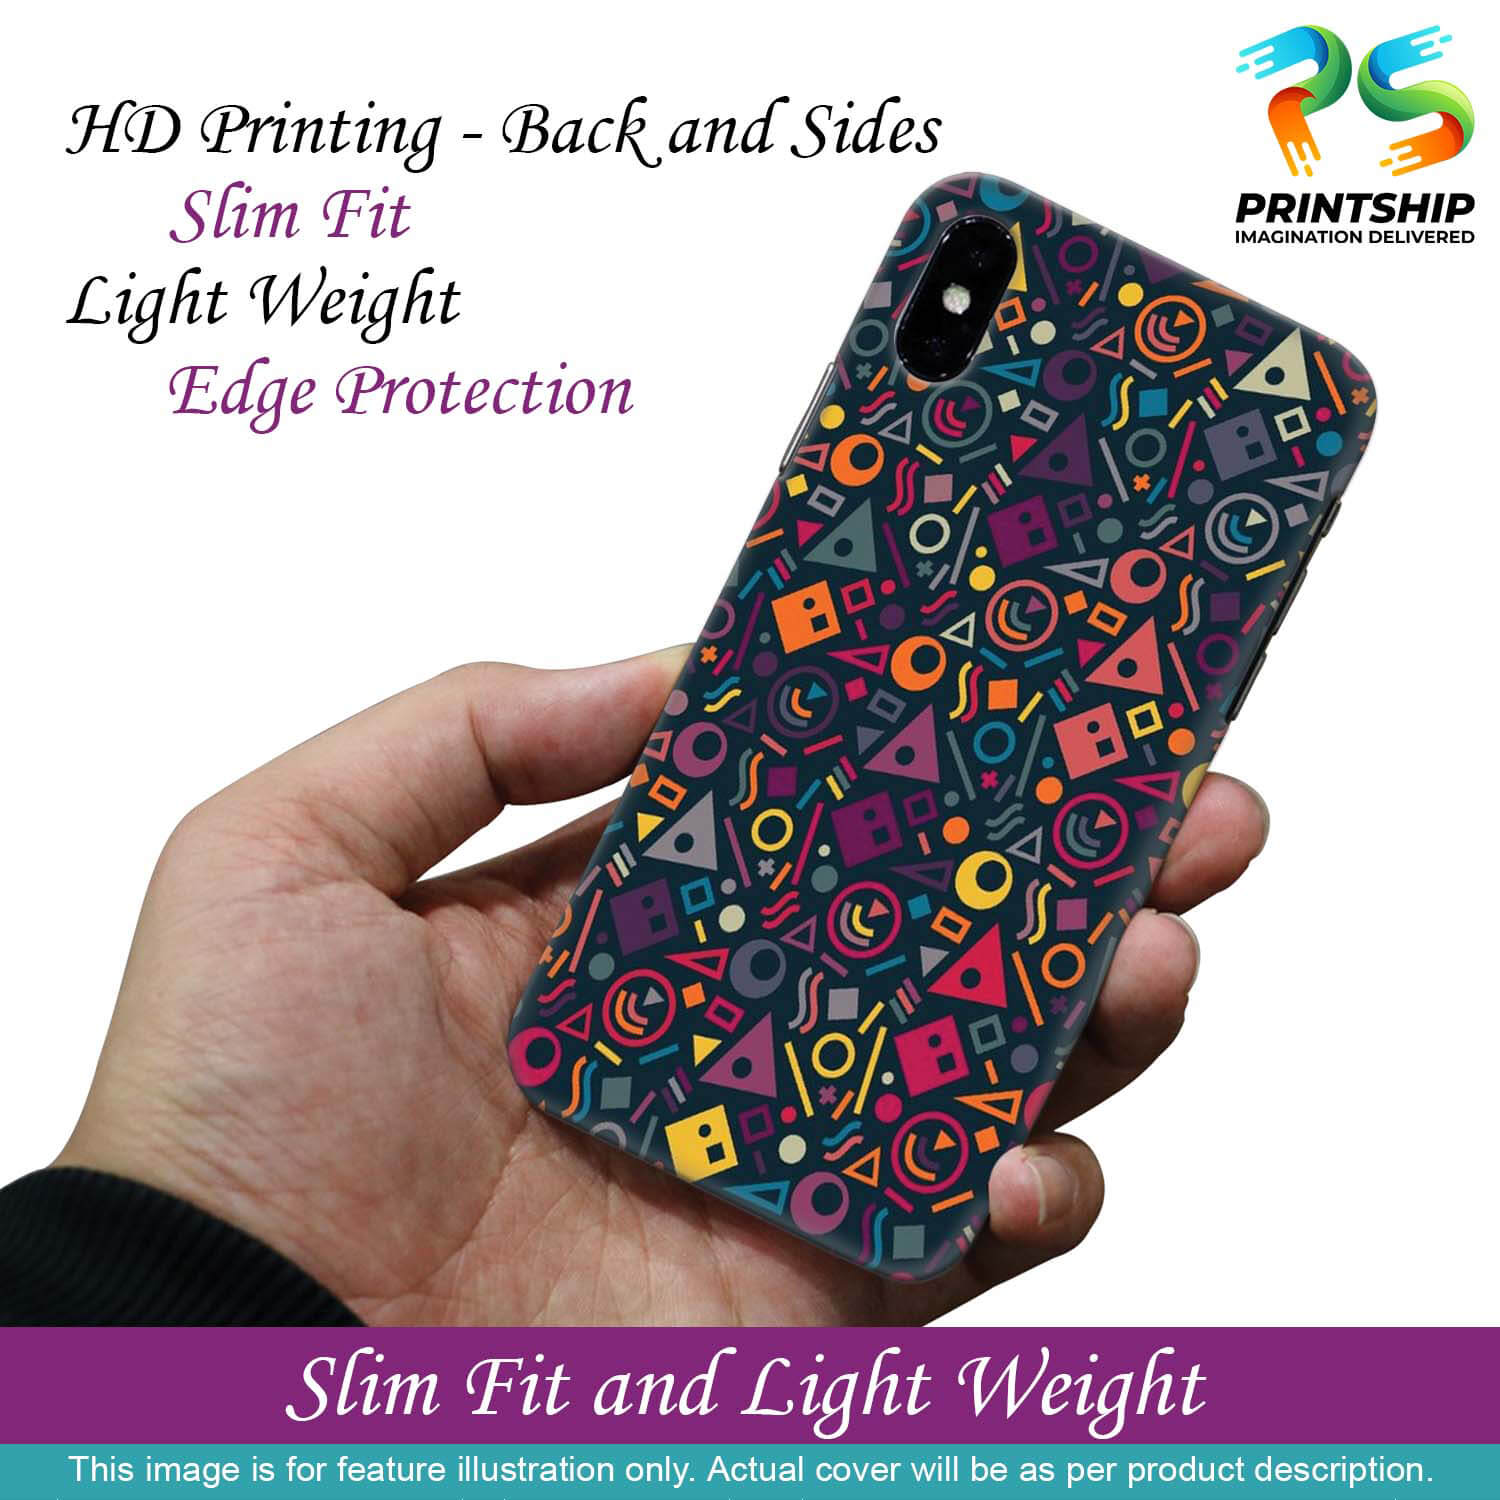 PS1304-Abstract Pattern Back Cover for Samsung Galaxy M51